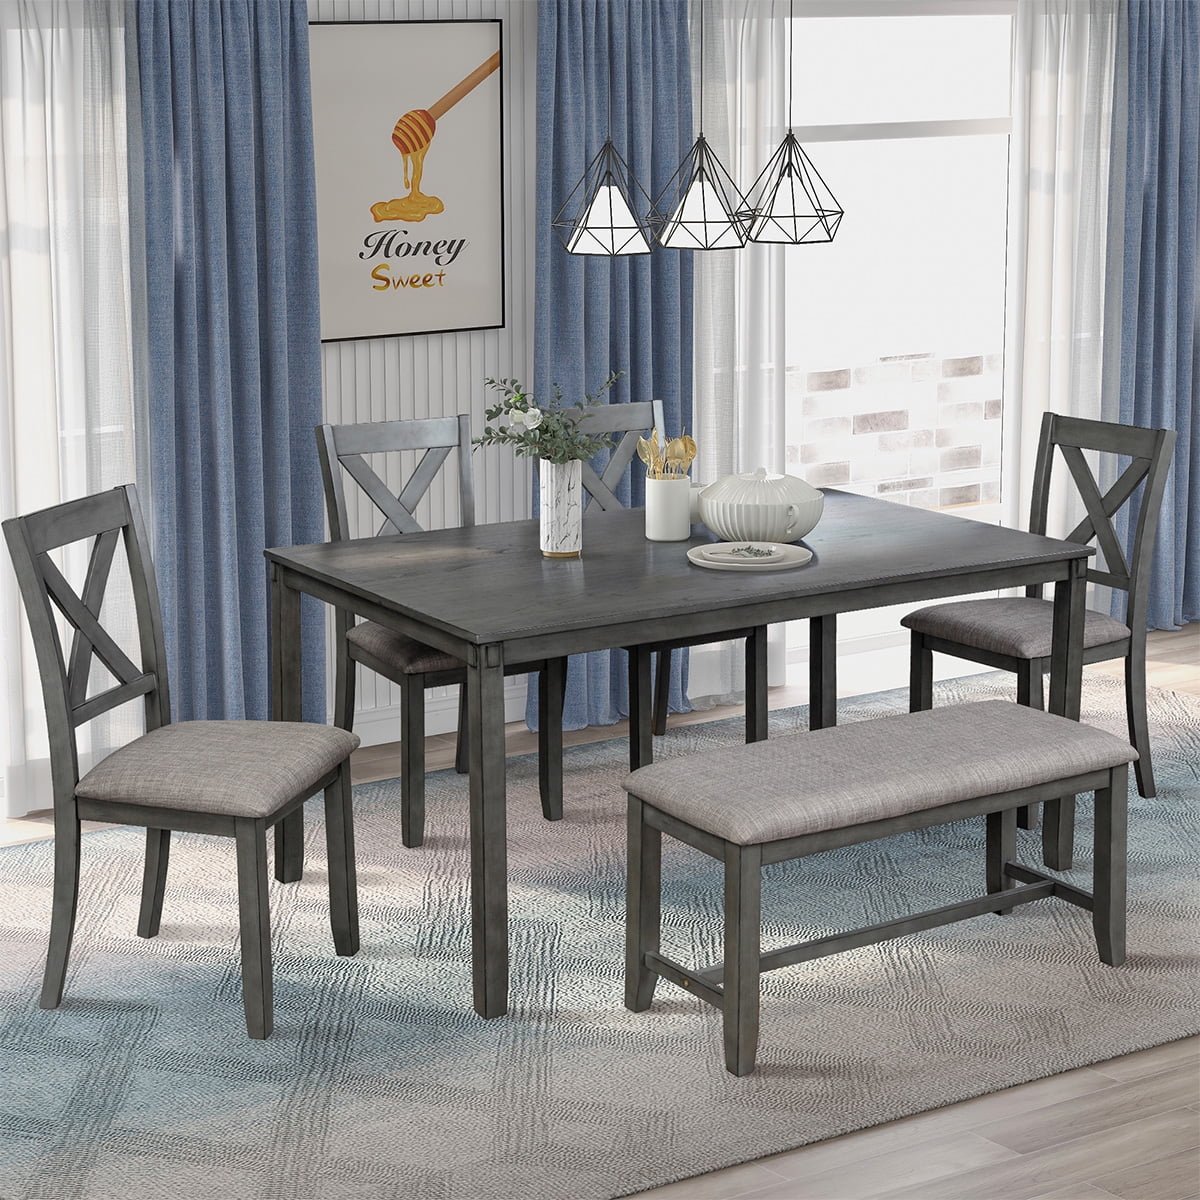 Dining Table Set Walmart Dining Kitchen Table Dining Set Dining Room Table Set Table And Chair